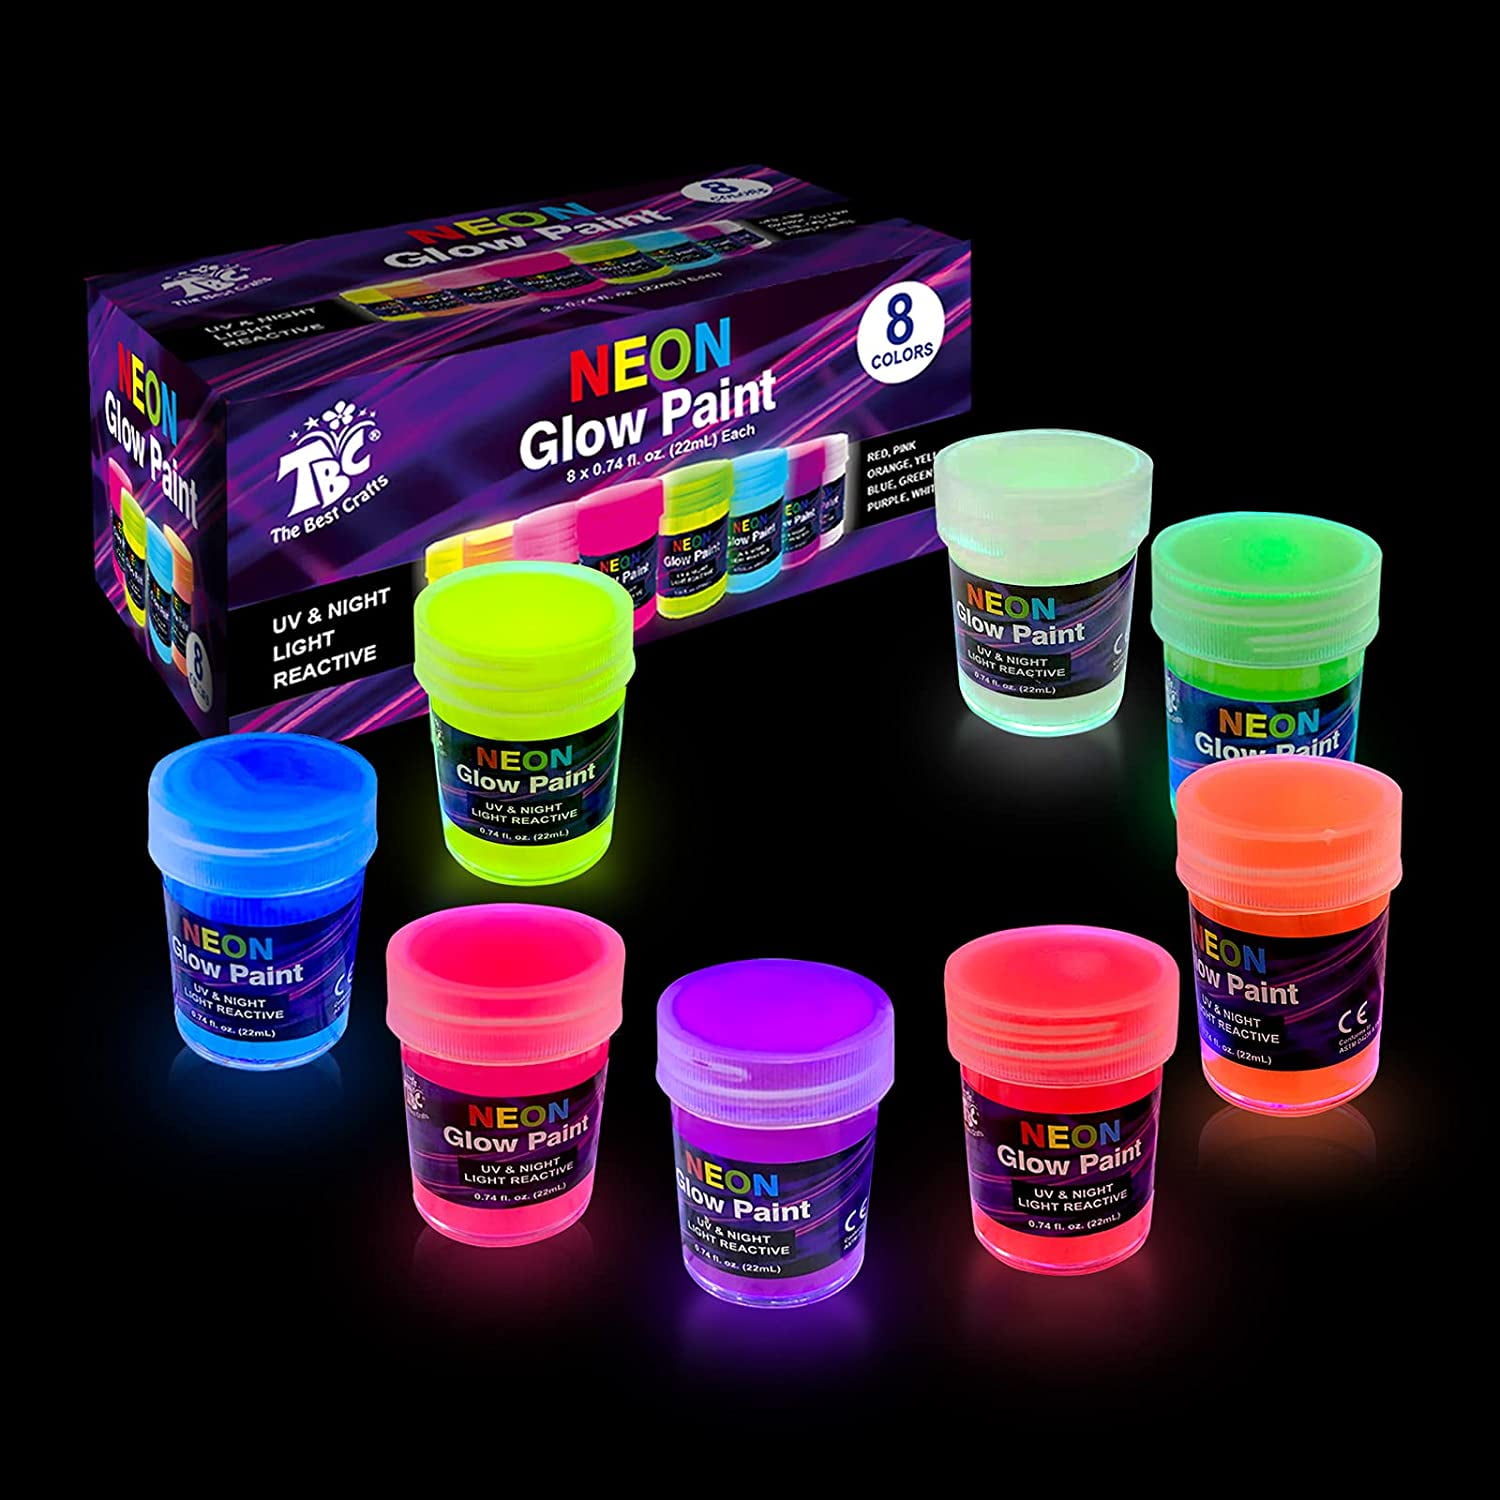 Glow in the Dark Powder - 48 PACK Bulk Party Supplies Favors and  Decorations Works Great in Addition with Sticks, Necklaces, Glasses,  Luminous Pigment Powder Fluorescent UV Neon Dye Dust G 